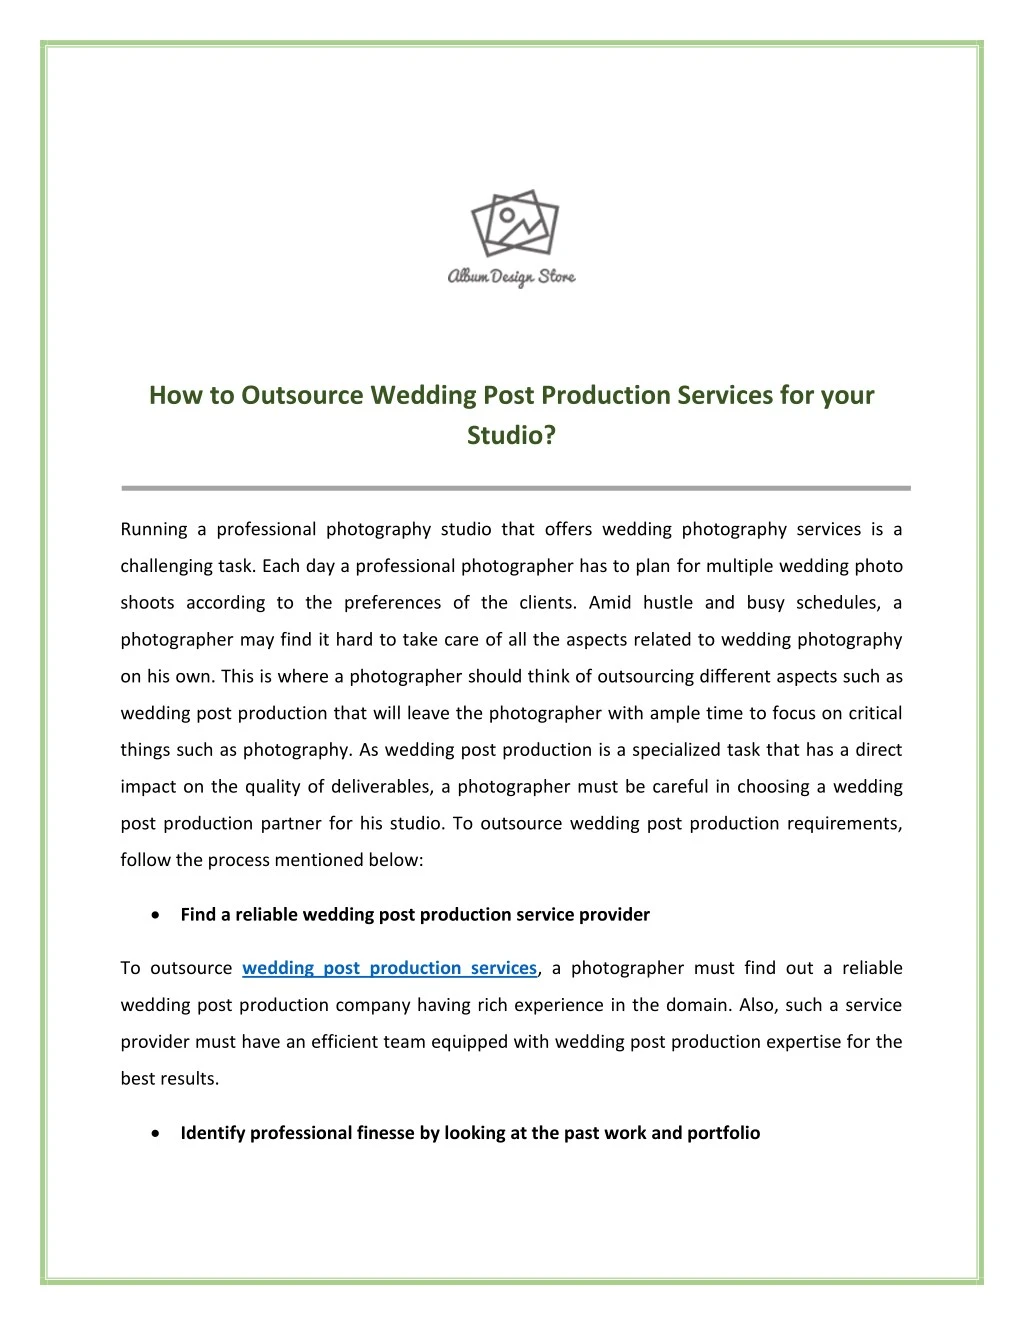 how to outsource wedding post production services